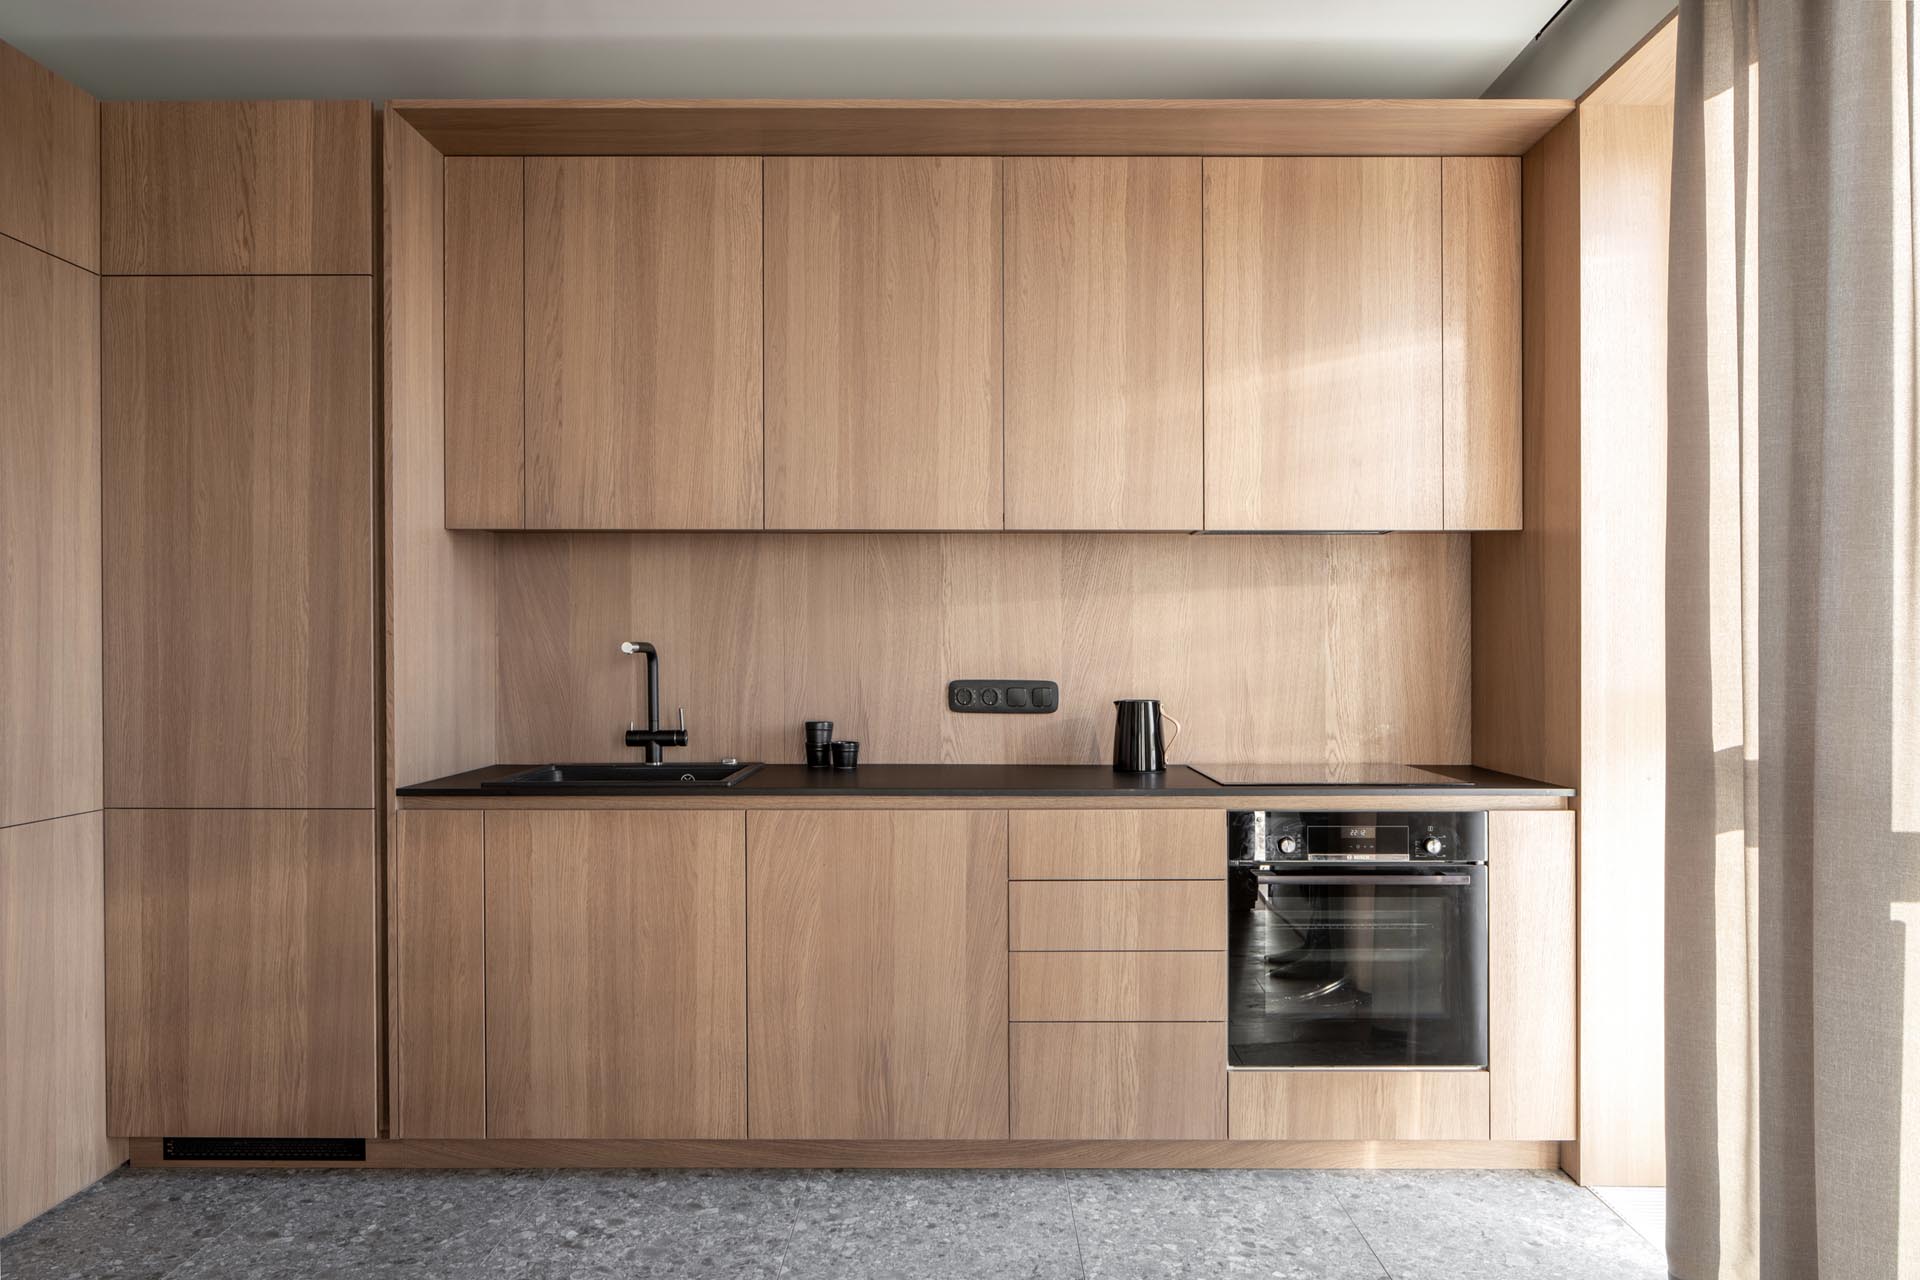 wood cabinets without hardware are a consistent feature throughout